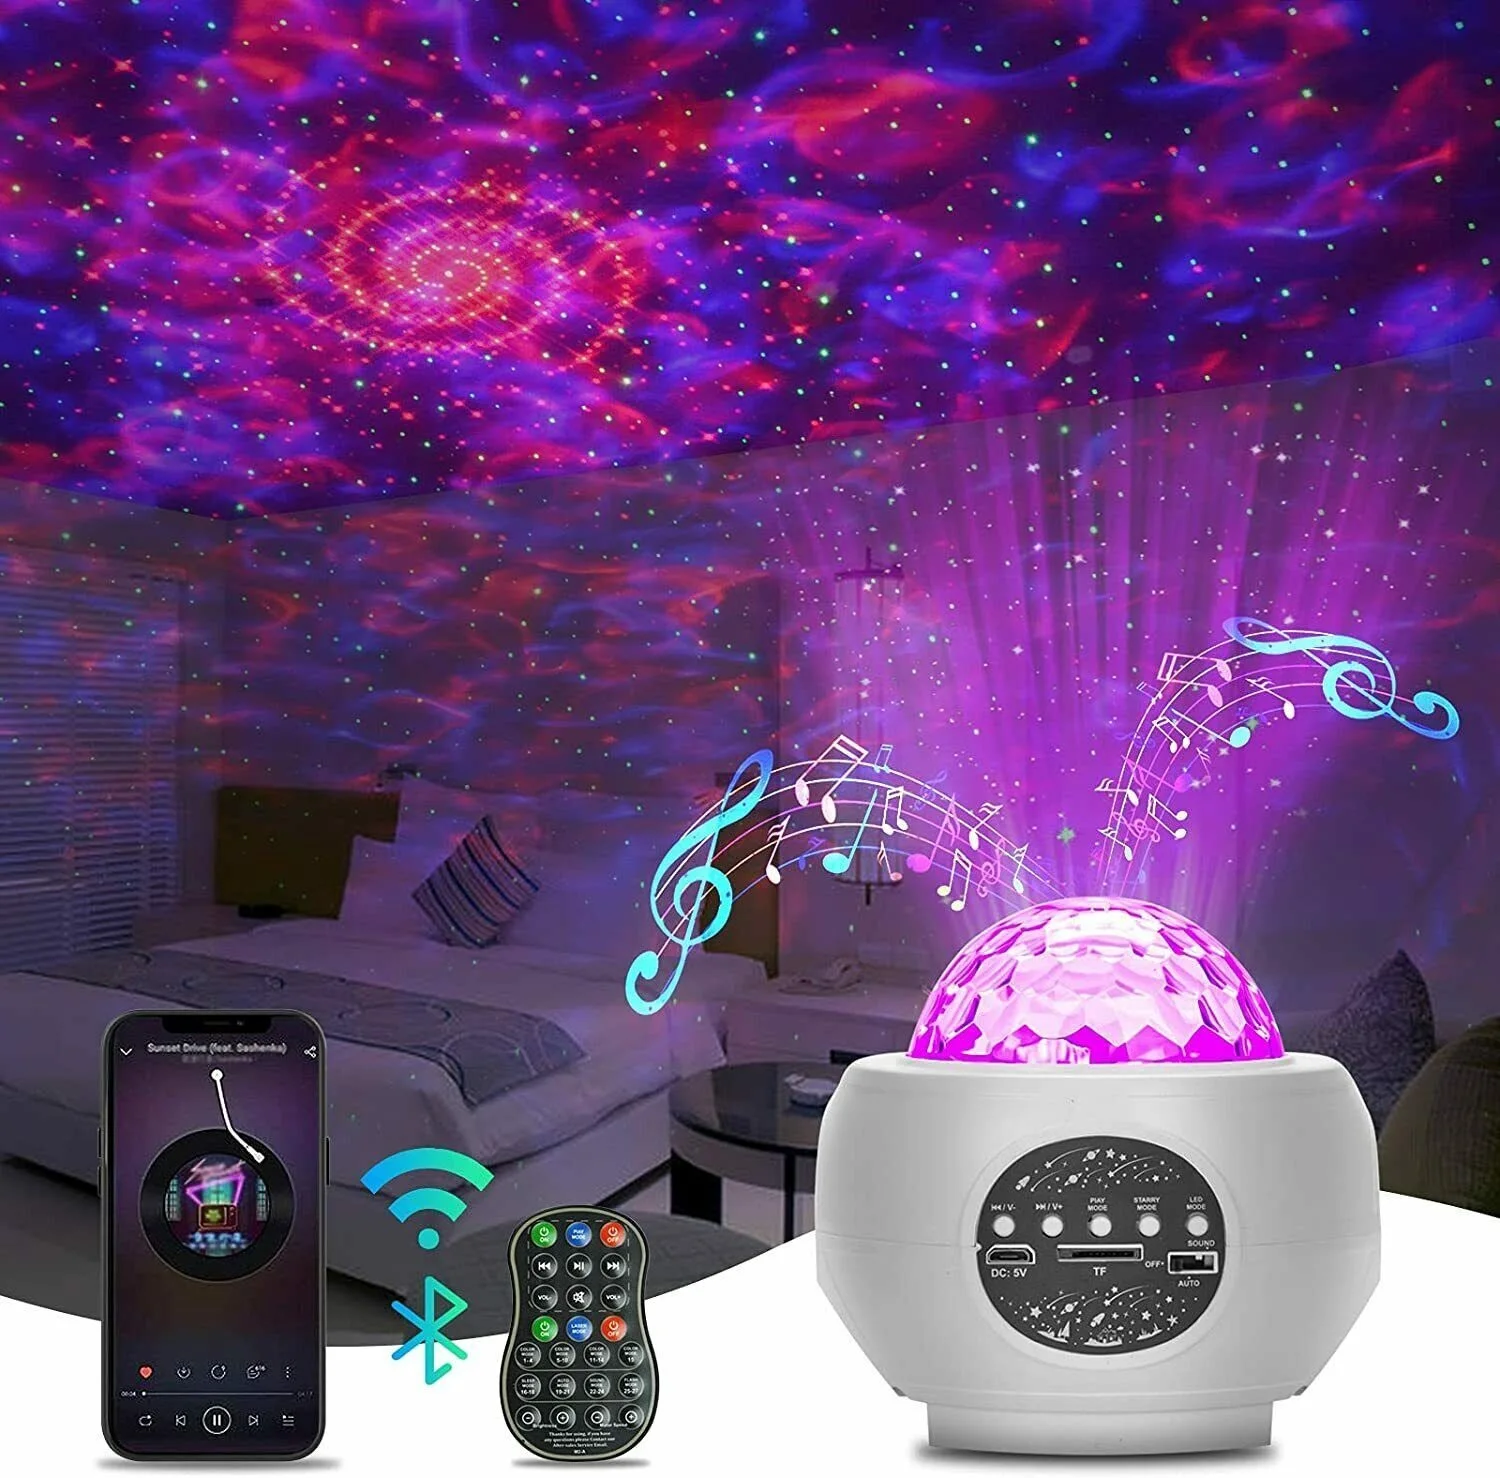 LED Galaxy Starry Night Light Projector Ocean Sky Star Party Speaker Remote Lamp 